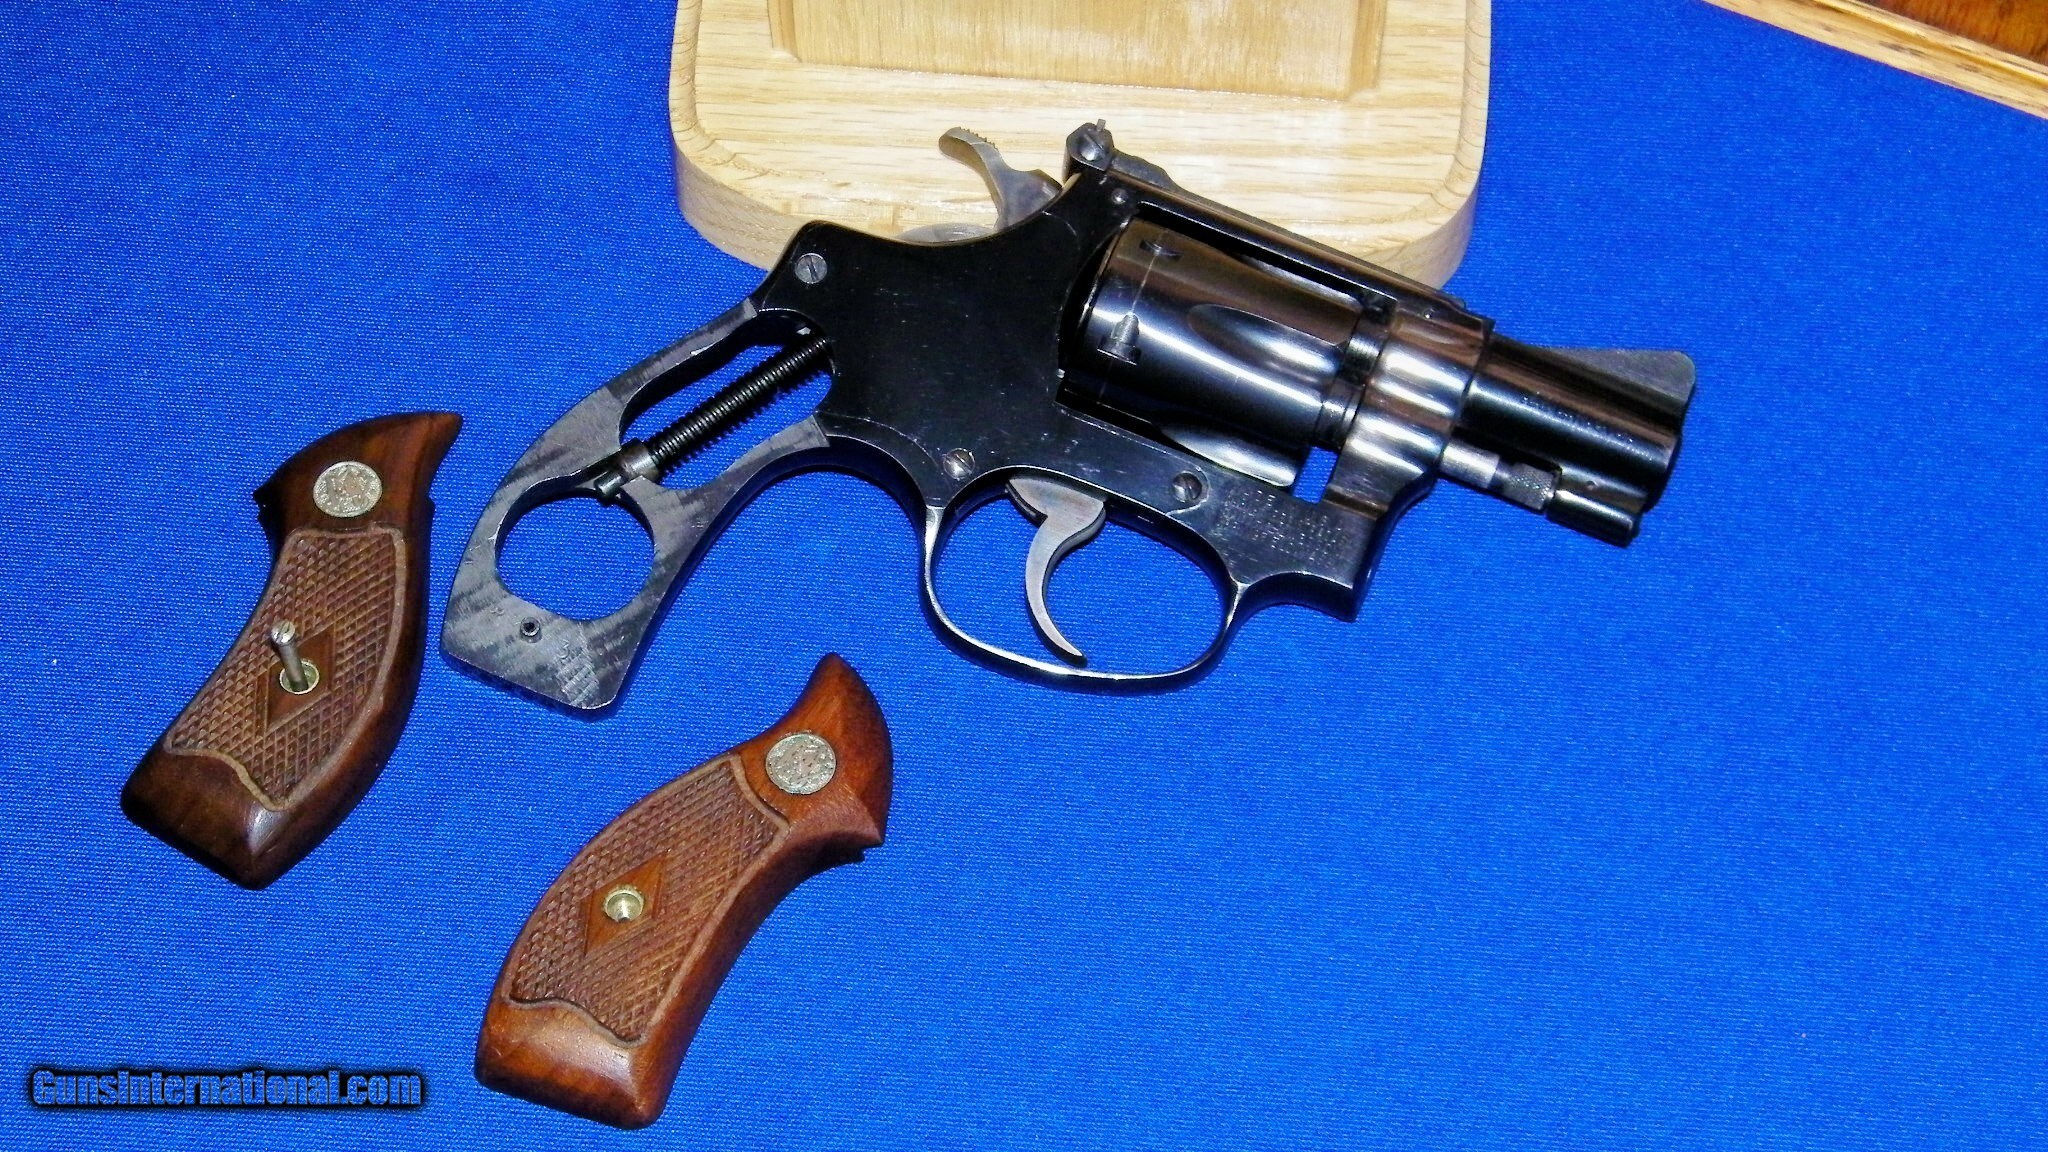 How to date smith and wesson by serial number